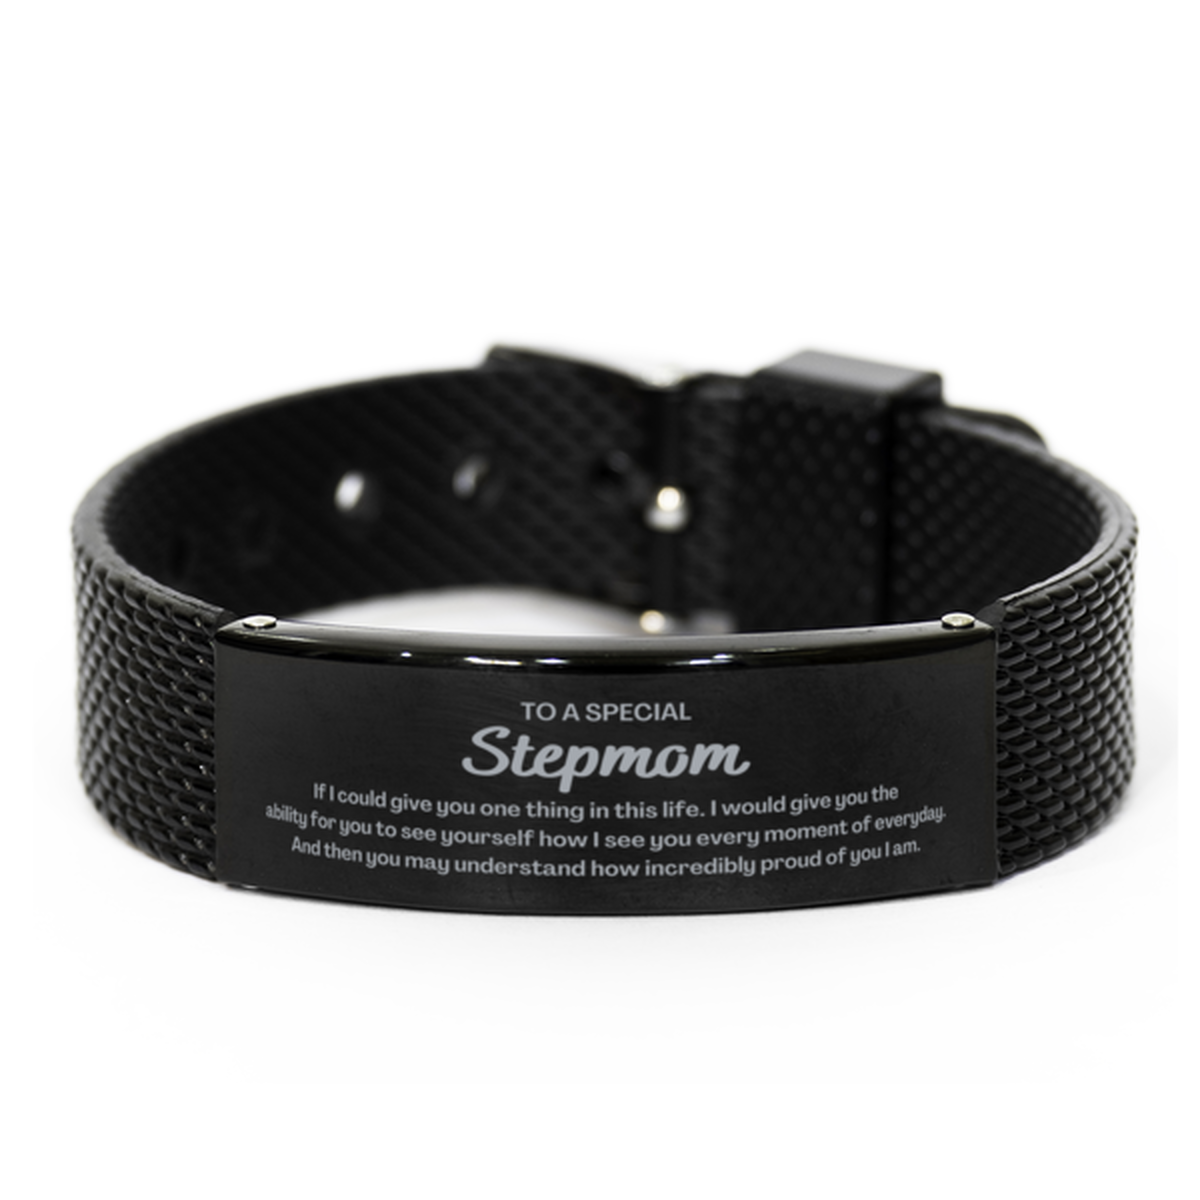 To My Stepmom Black Shark Mesh Bracelet, Gifts For Stepmom Engraved, Inspirational Gifts for Christmas Birthday, Epic Gifts for Stepmom To A Special Stepmom how incredibly proud of you I am